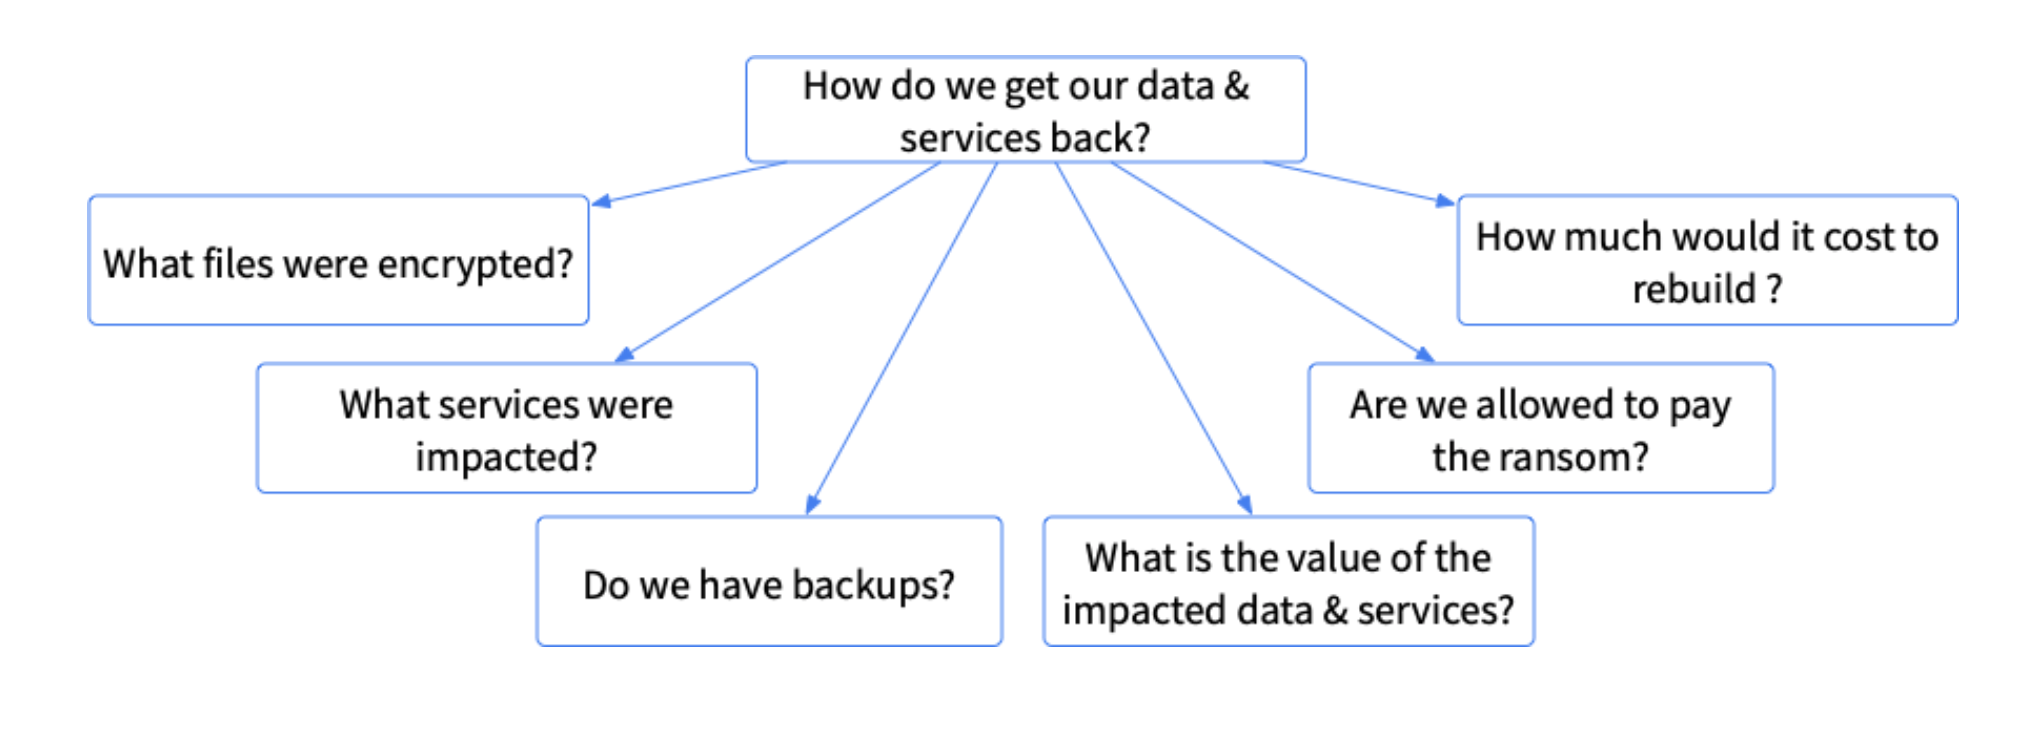 Diagram of questions related to getting services back after a ransomware attack.